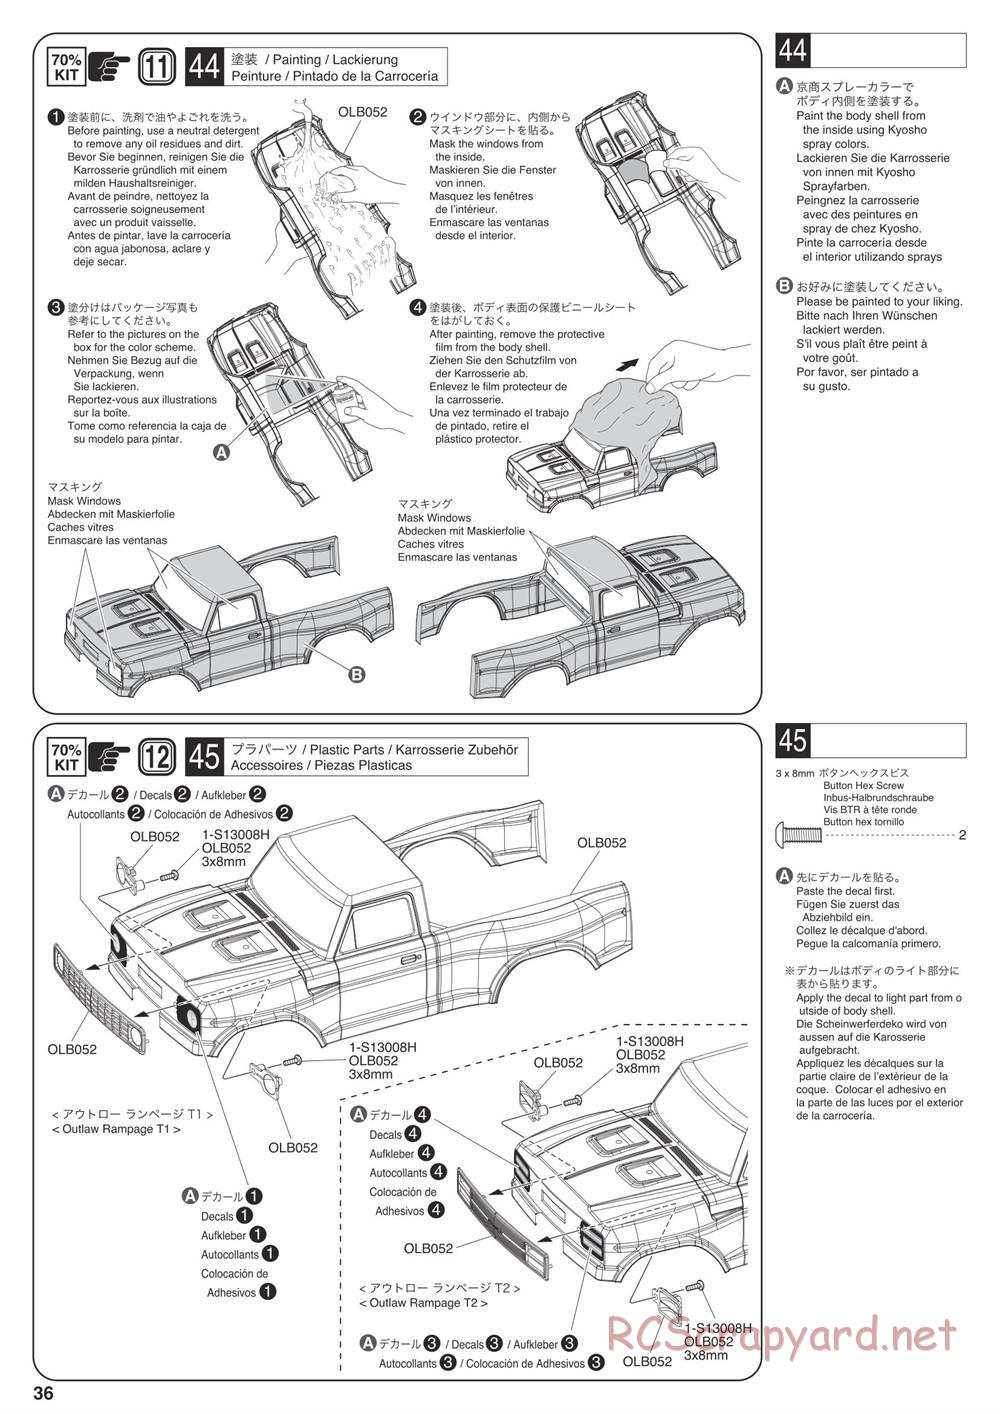 Kyosho - Outlaw Rampage Pro - Manual - Page 36